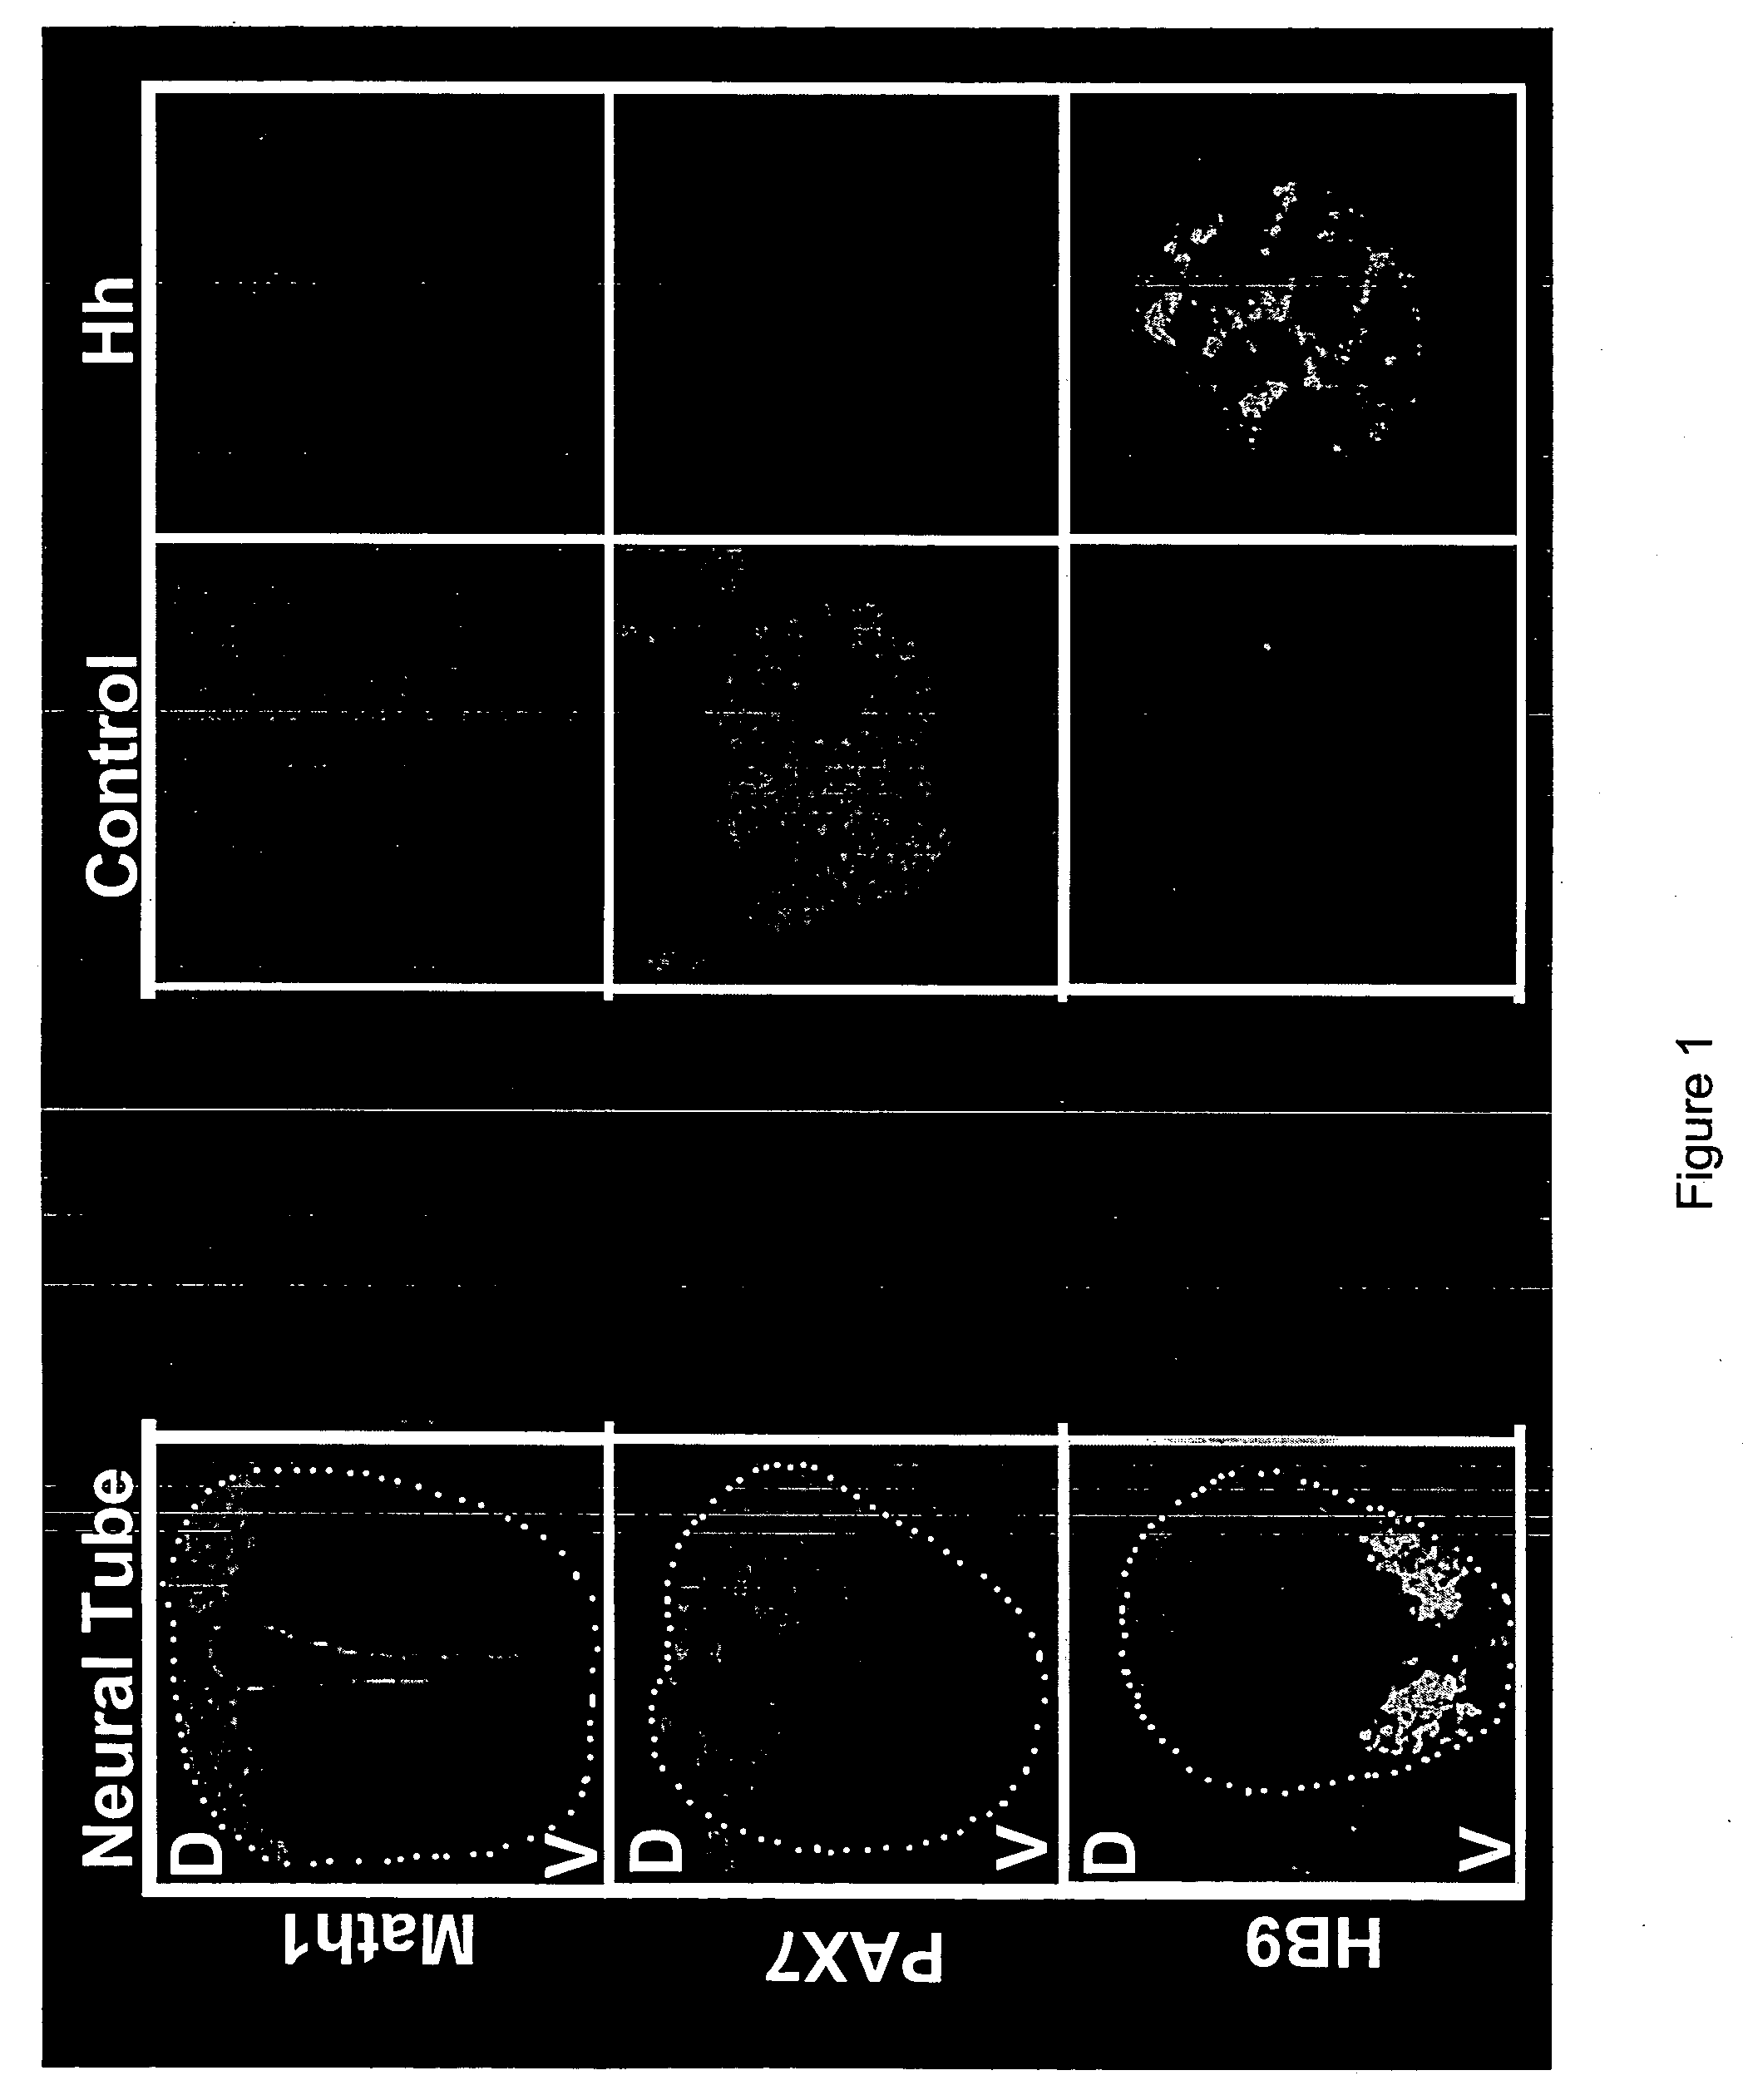 Stem cell-based methods for identifying and characterizing agents